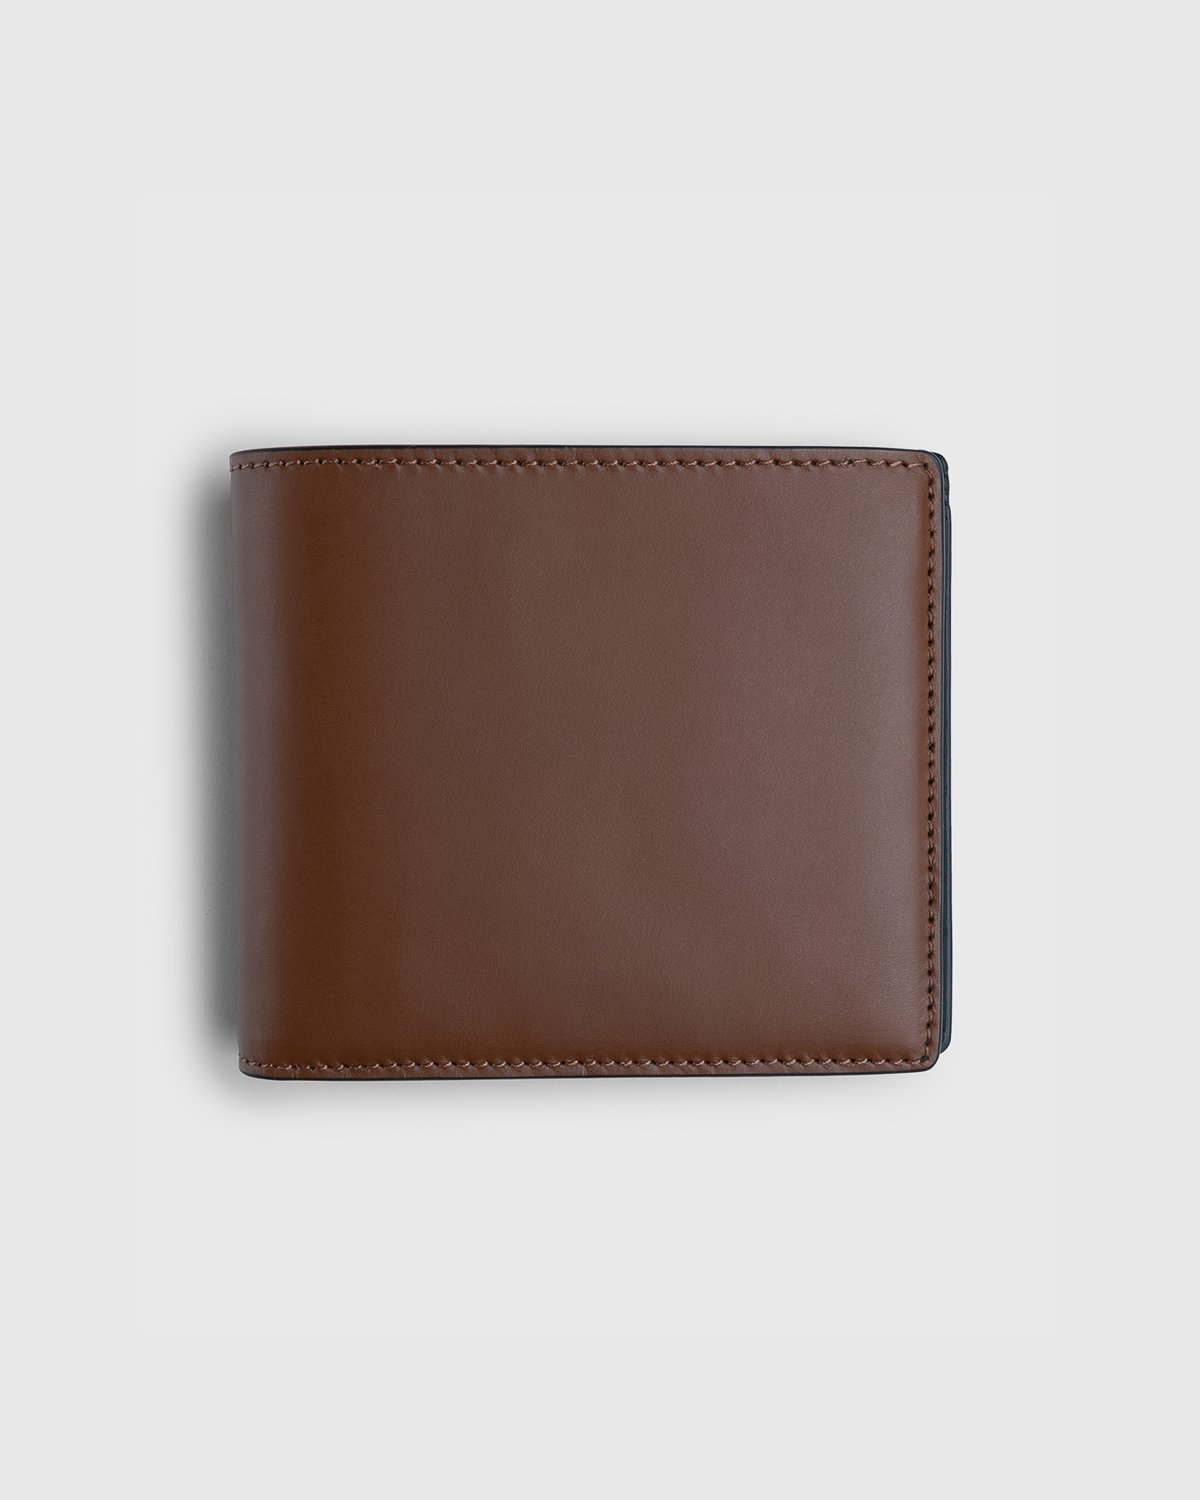 Maison Margiela - Leather Wallet Brown - Accessories - Brown - Image 2